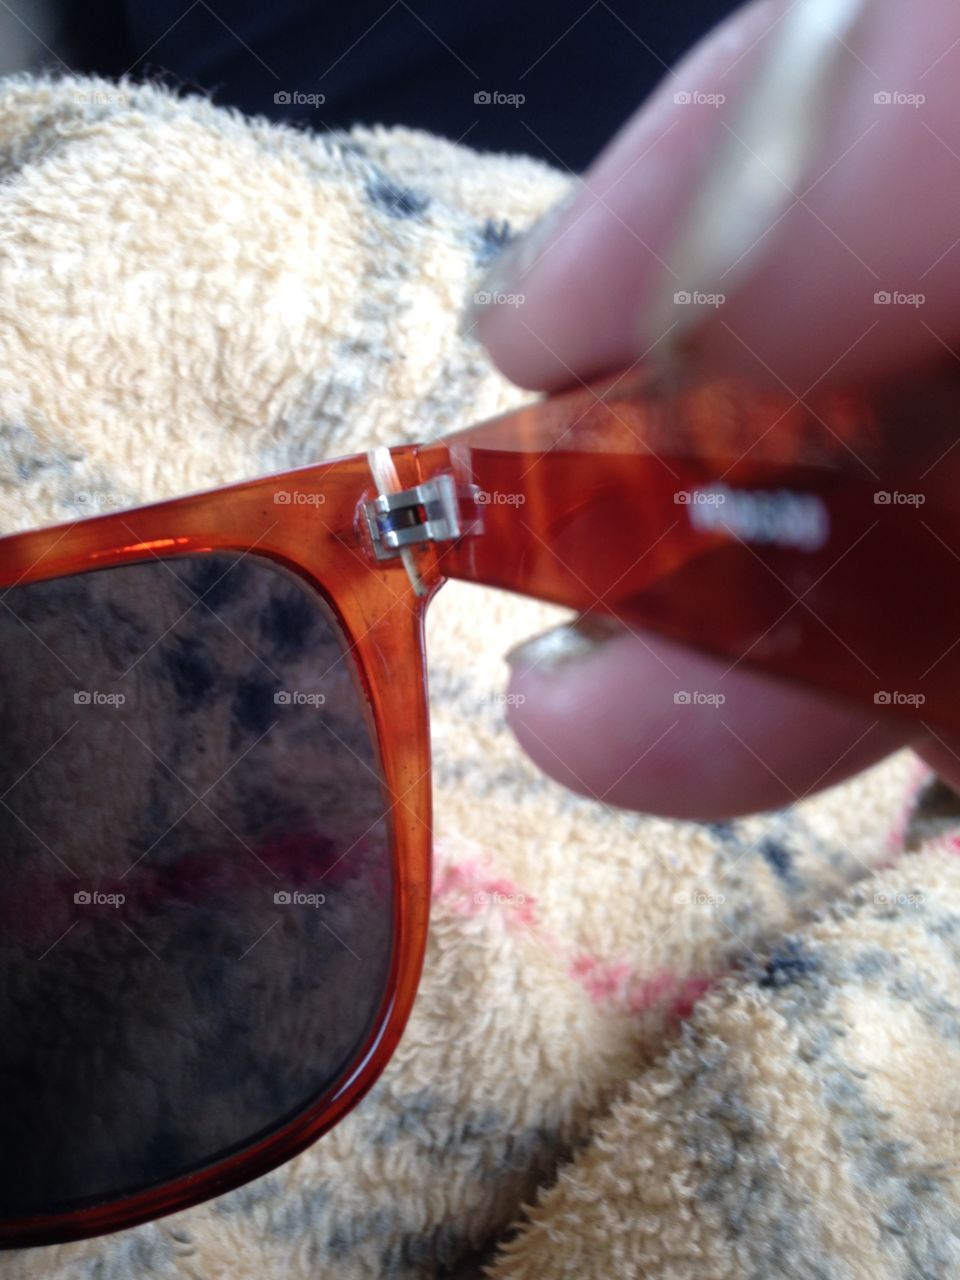 Sunglasses repaired with a toothpick. 